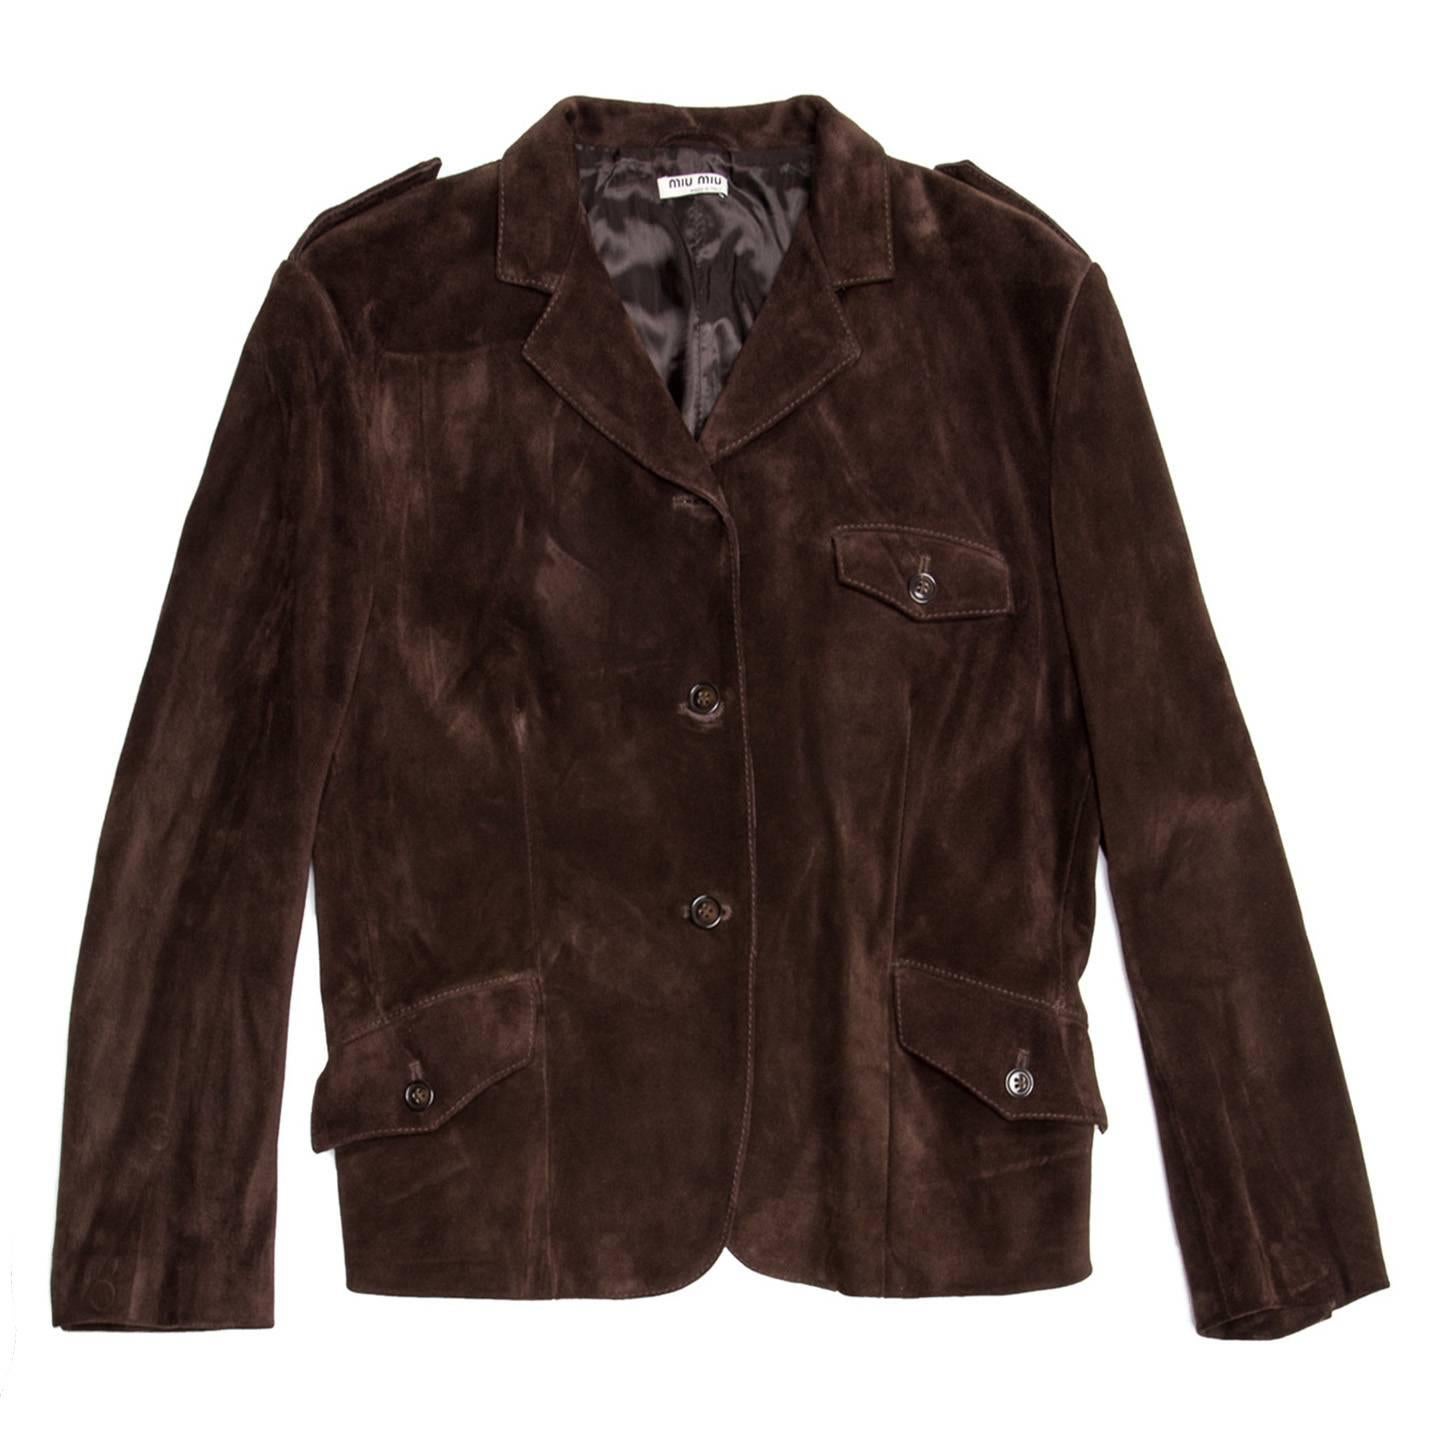 Chocolate brown suede cropped jacket with flap pockets on waist and bust fastened by tone-on-tone buttons. The blazer is single breasted with a 3 button closure, a small notched lapel and military style shoulder loops.

Size  46 Italian